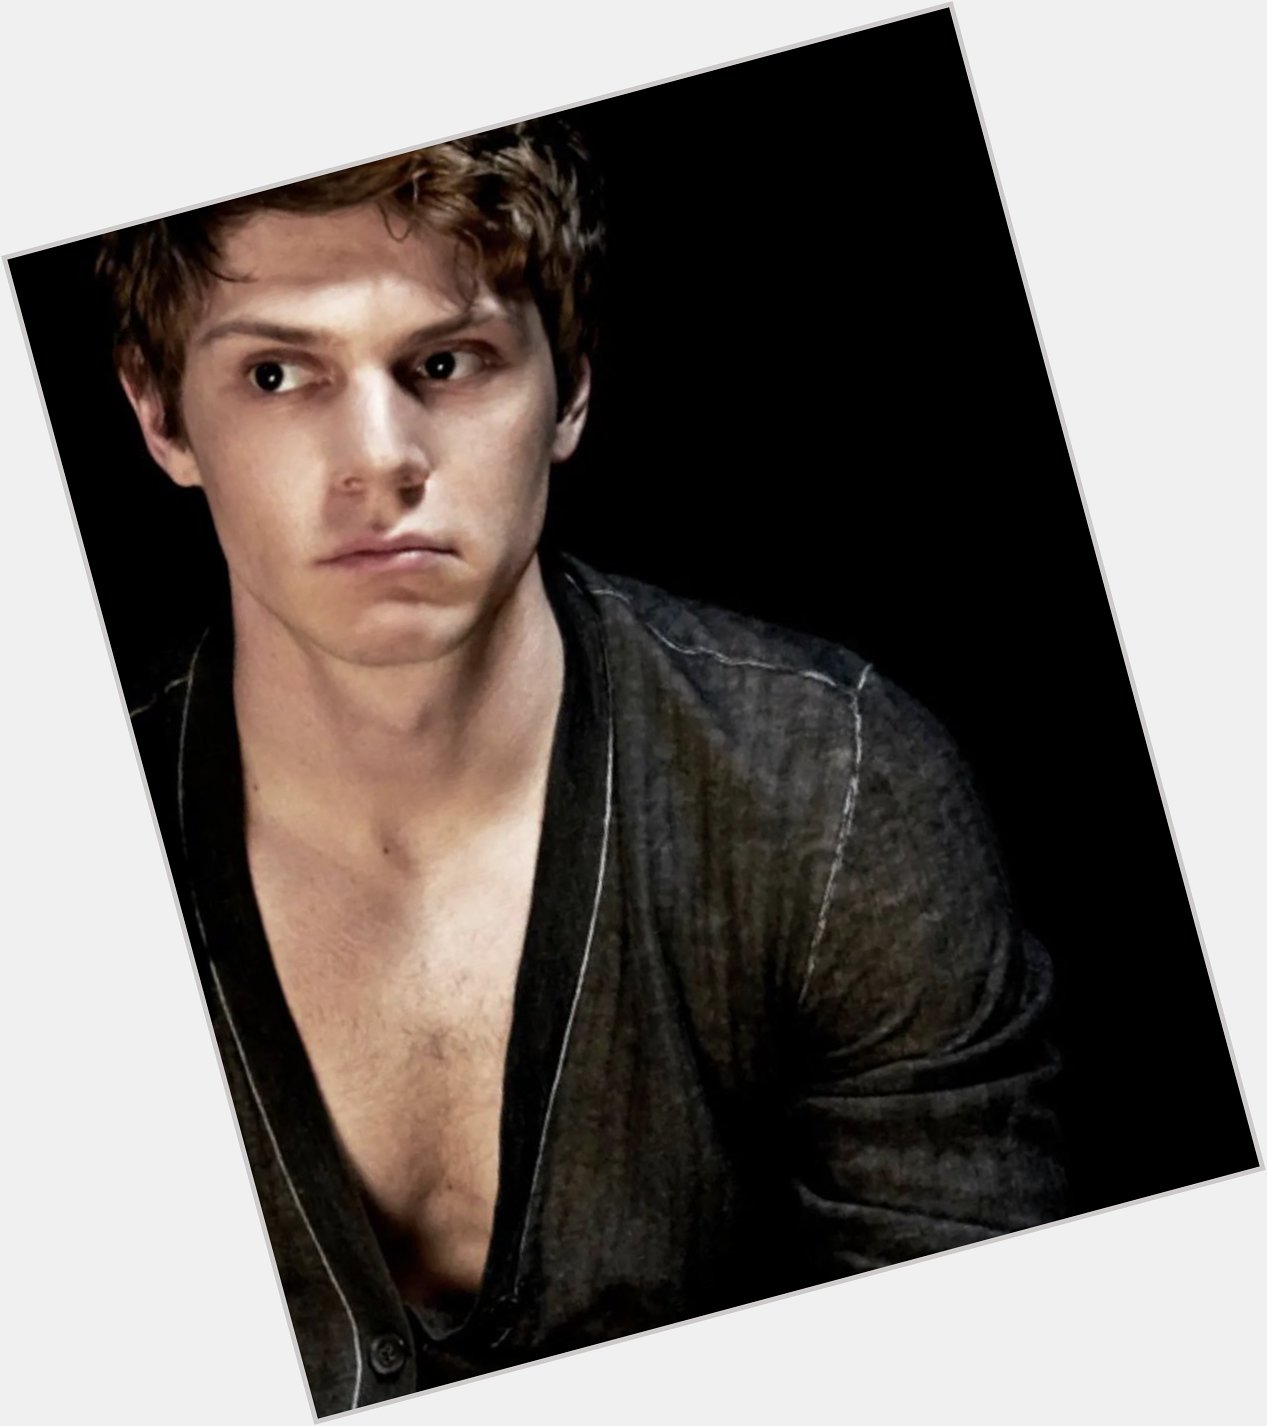 Happy birthday to baby daddy Evan Peters  